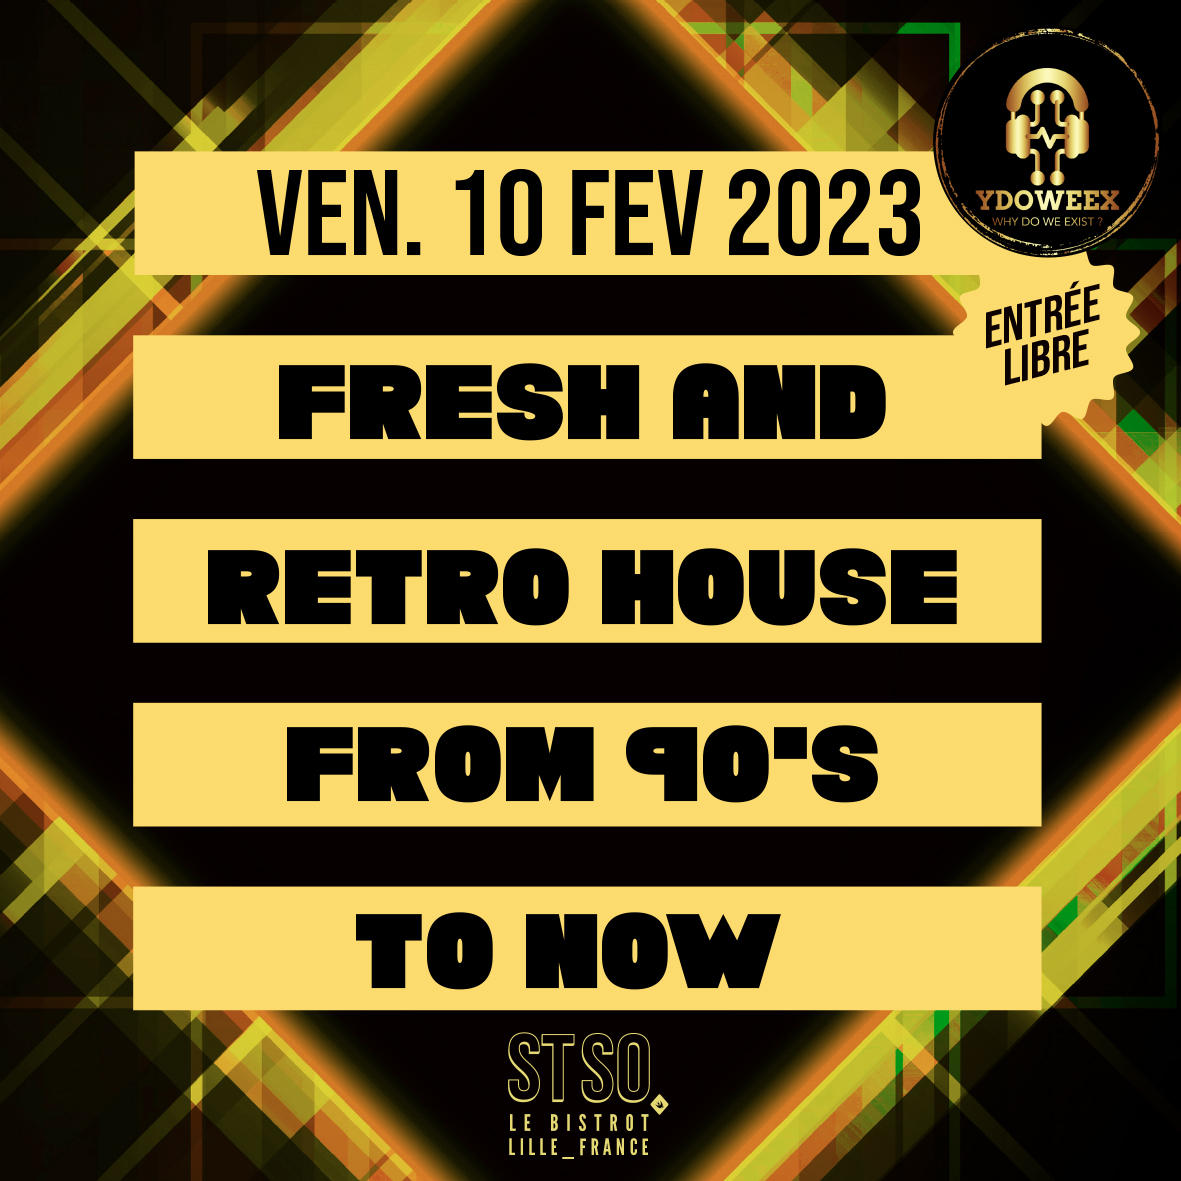 Ydoweex – House from 90’s to now